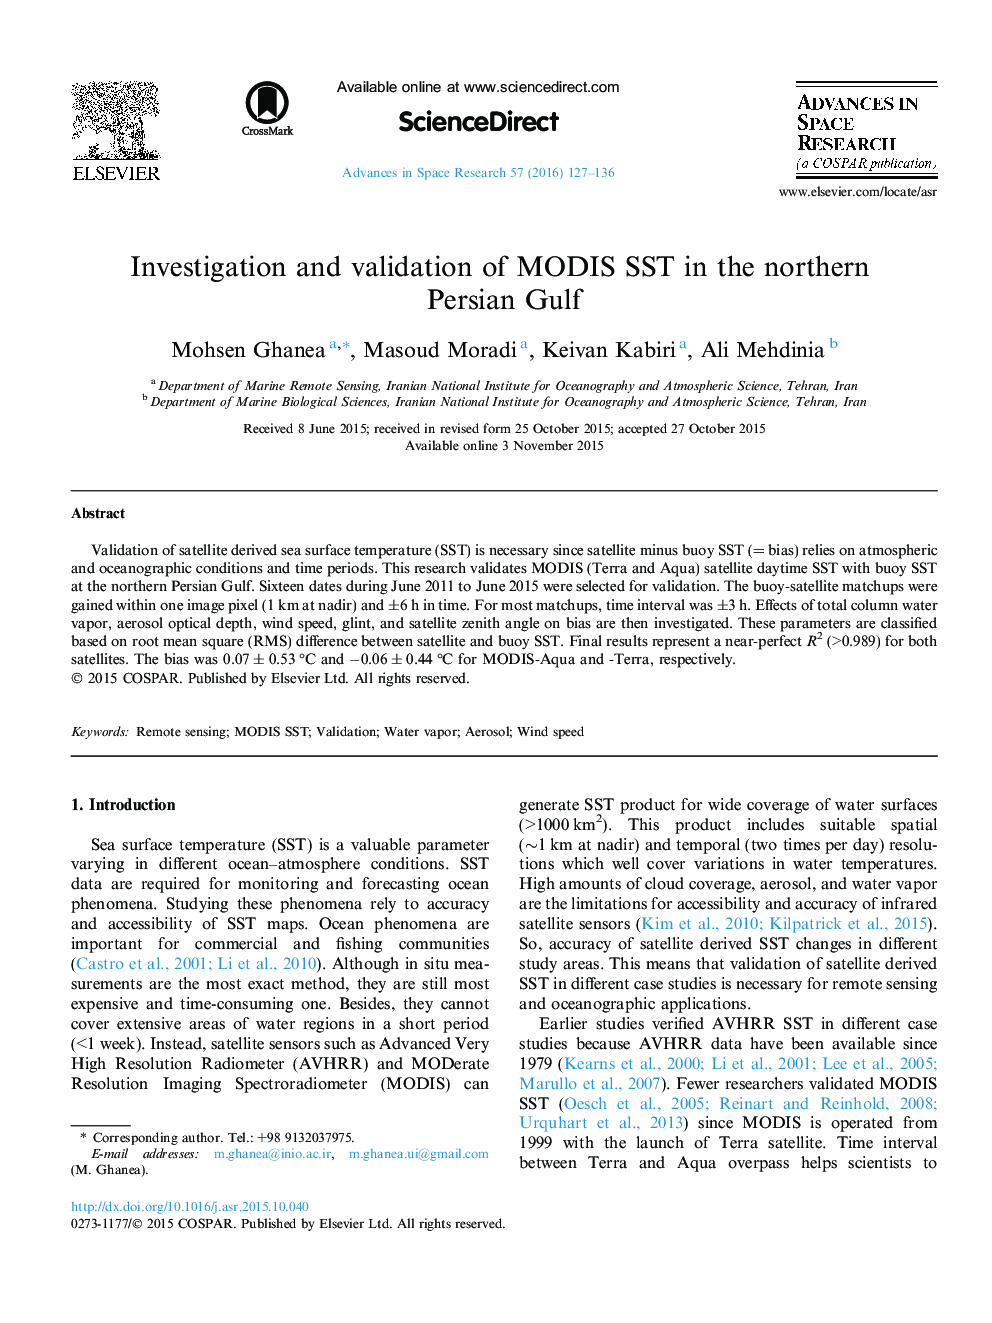 Investigation and validation of MODIS SST in the northern Persian Gulf